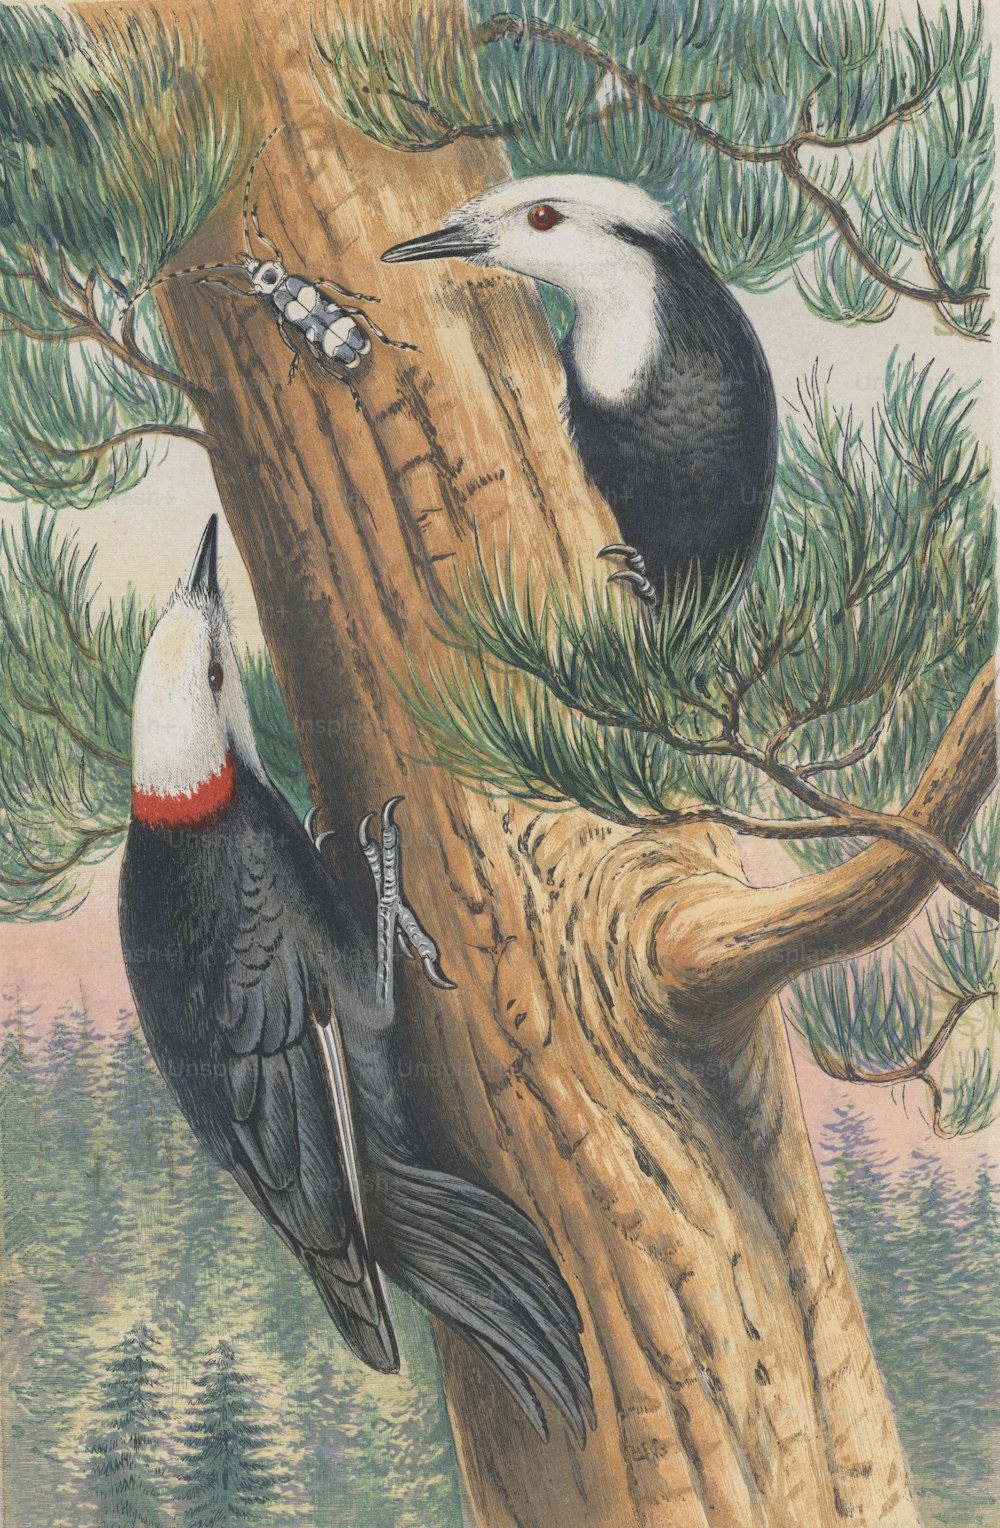 Two White-headed Woodpeckers (Picus or Picoides albolarvatus) foraging for insects, circa 1850. Print by Baird after T. W. Wood. (Photo by Hulton Archive/Getty Images)